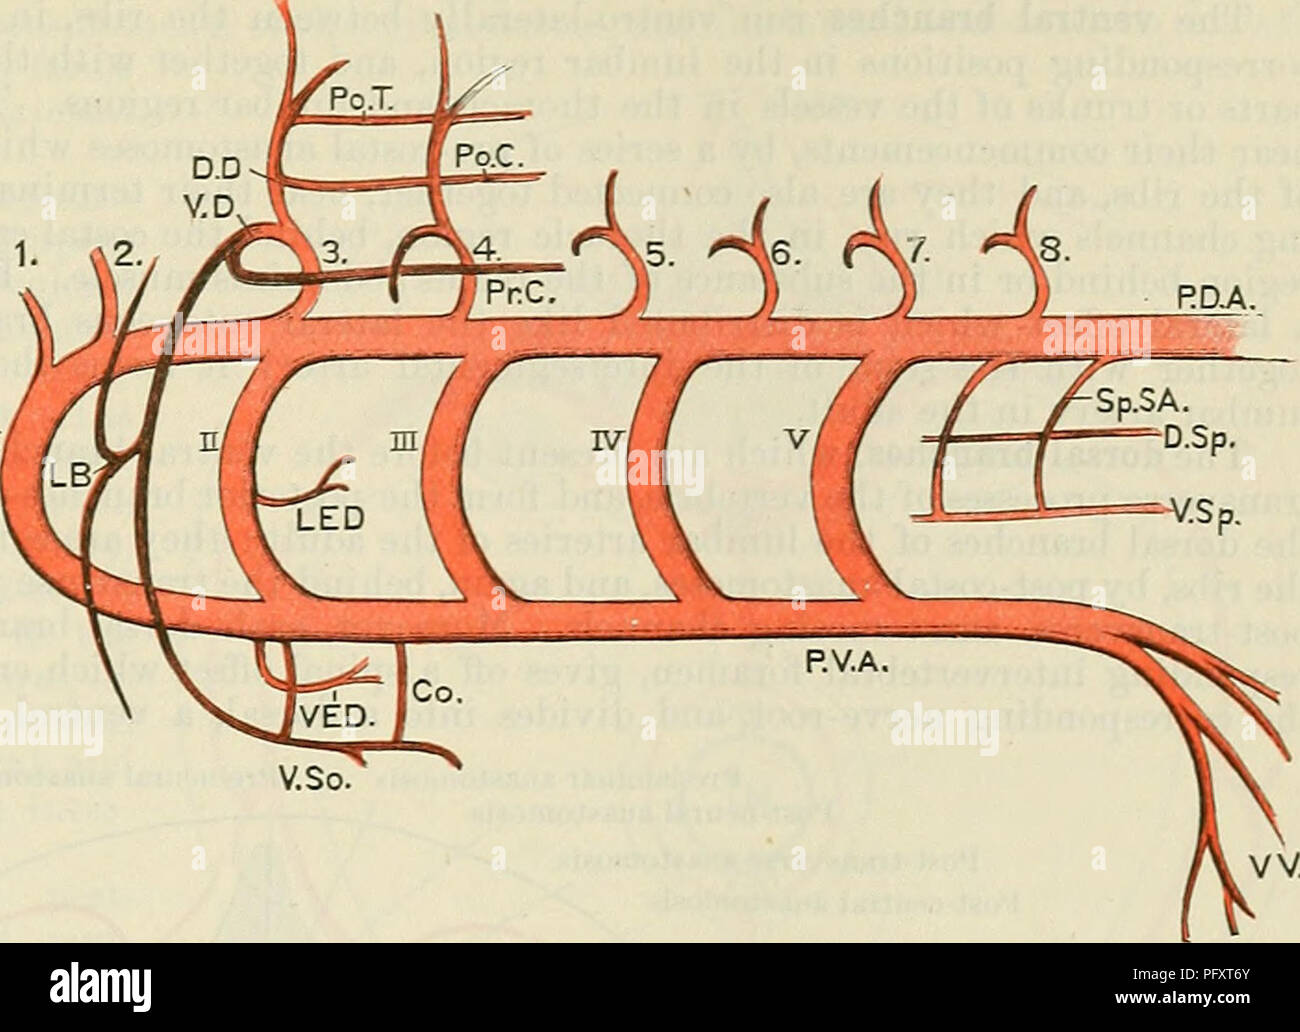 . Cunningham's Text-book of anatomy. Anatomy. THE SEGMENTAL AETEEIES AND THEIE ANASTOMOSES. 1043 So.SA. 'V 4 *V 4 The segmental arteries and veins form a series of bilaterally symmetrical vessels, each of which is united to the vessels of adjacent segments by intersegmental channels, which anastomose with one another, through the portions of the segmental vessels which they connect together, and thus form longi- tudinal trunks. The longitudinal trunks are mainly, though not exclusively, in- tersegmental. From them the main stem vessels of the indi- vidual are formed, and from or to these latte Stock Photo